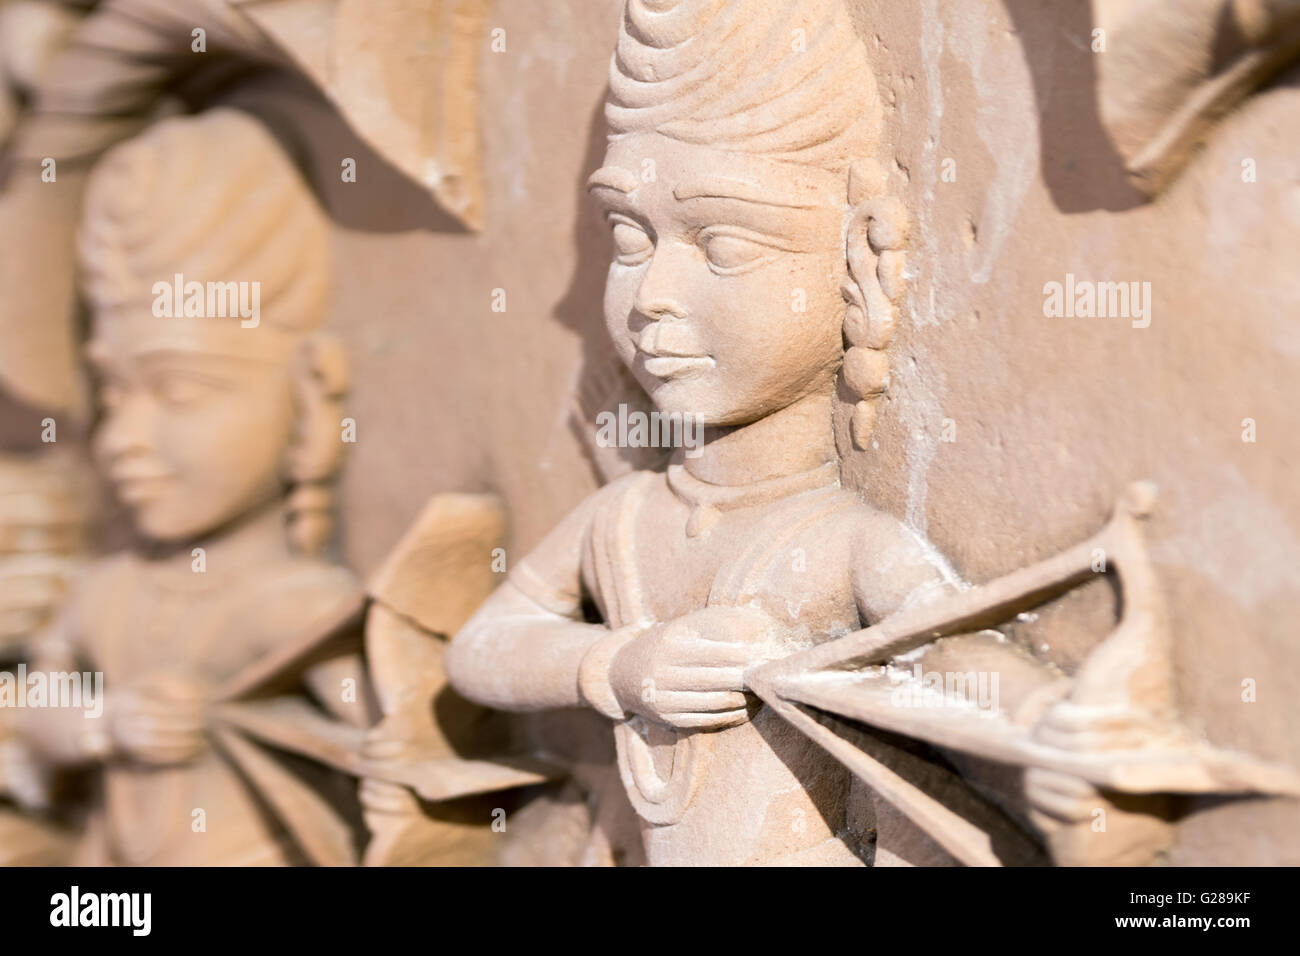 Stone Indian carving of a human figure holding a bow and arrow. Stock Photo